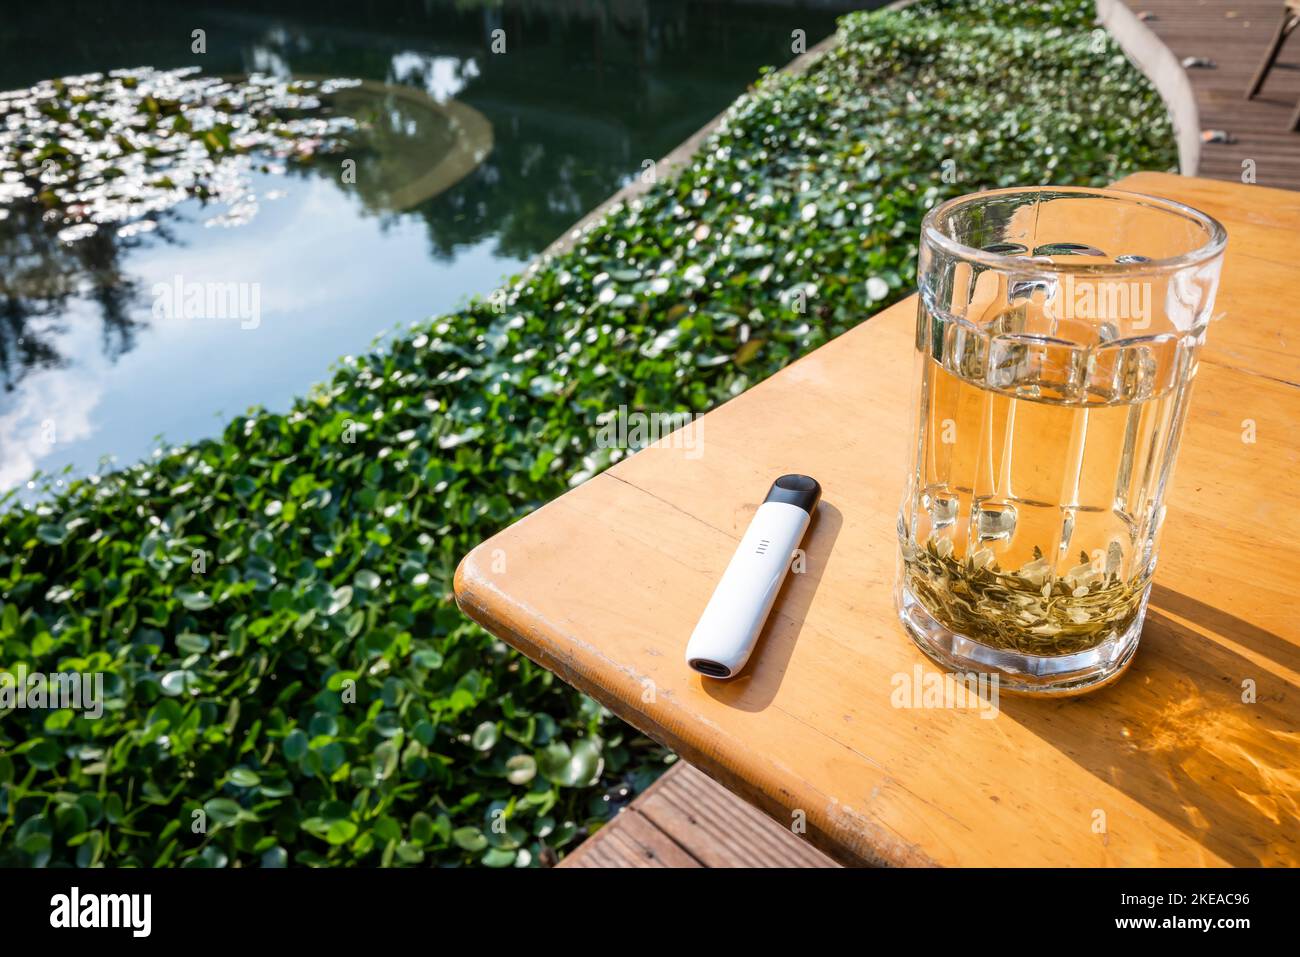 Electronic cigarette on a wooden table close-up view Stock Photo